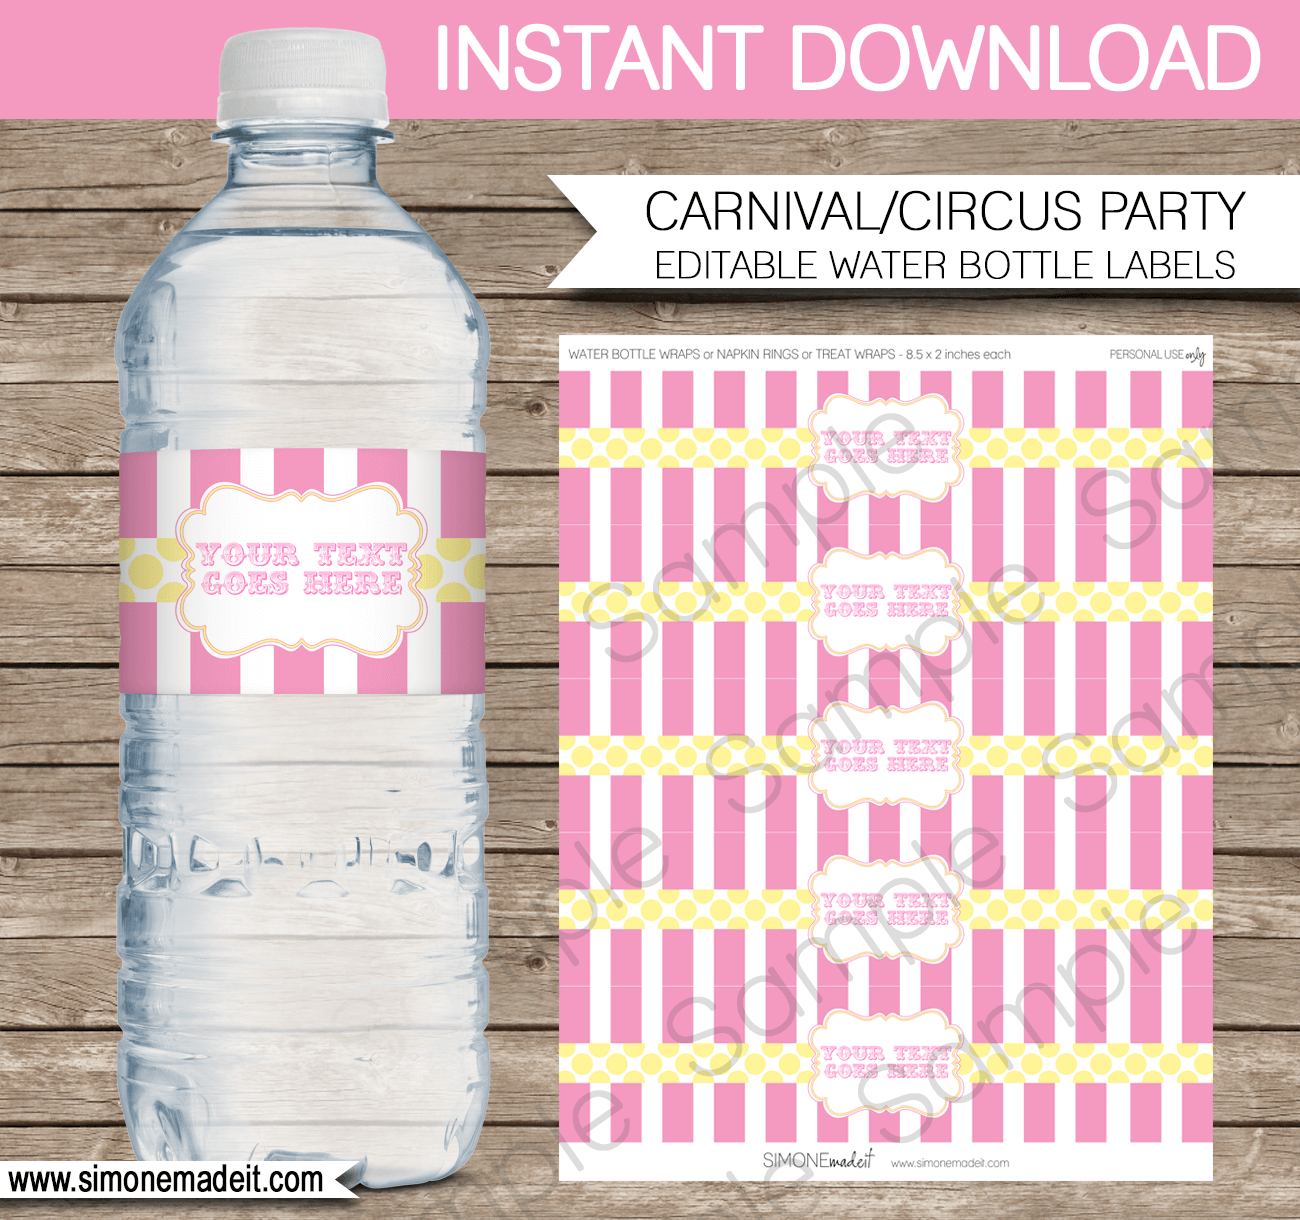 Editable Carnival Water Bottle Labels | Pink Yellow Carnival Party | Circus Birthday Party | Printable Decorations | DIY Template | $3.00 INSTANT DOWNLOAD via SIMONEmadeit.com